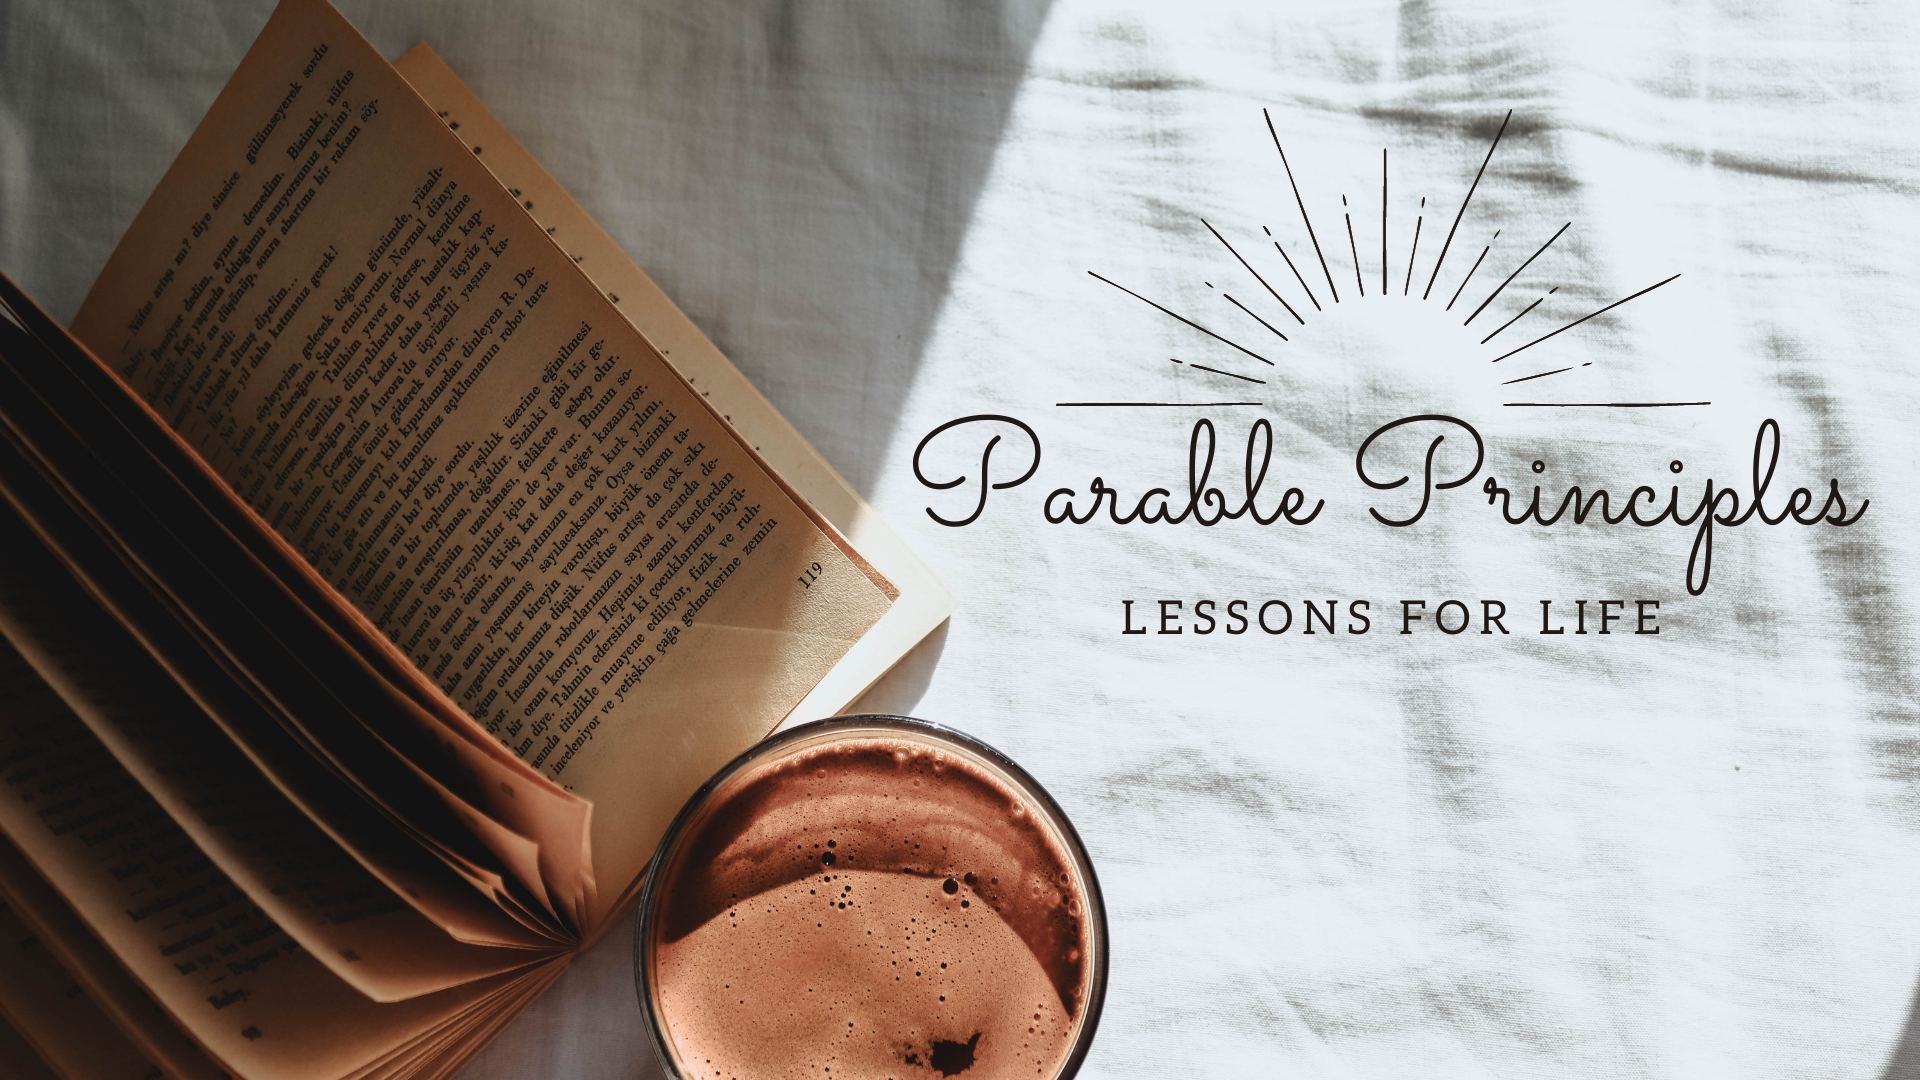 Principles from the Parables – “The Sower”